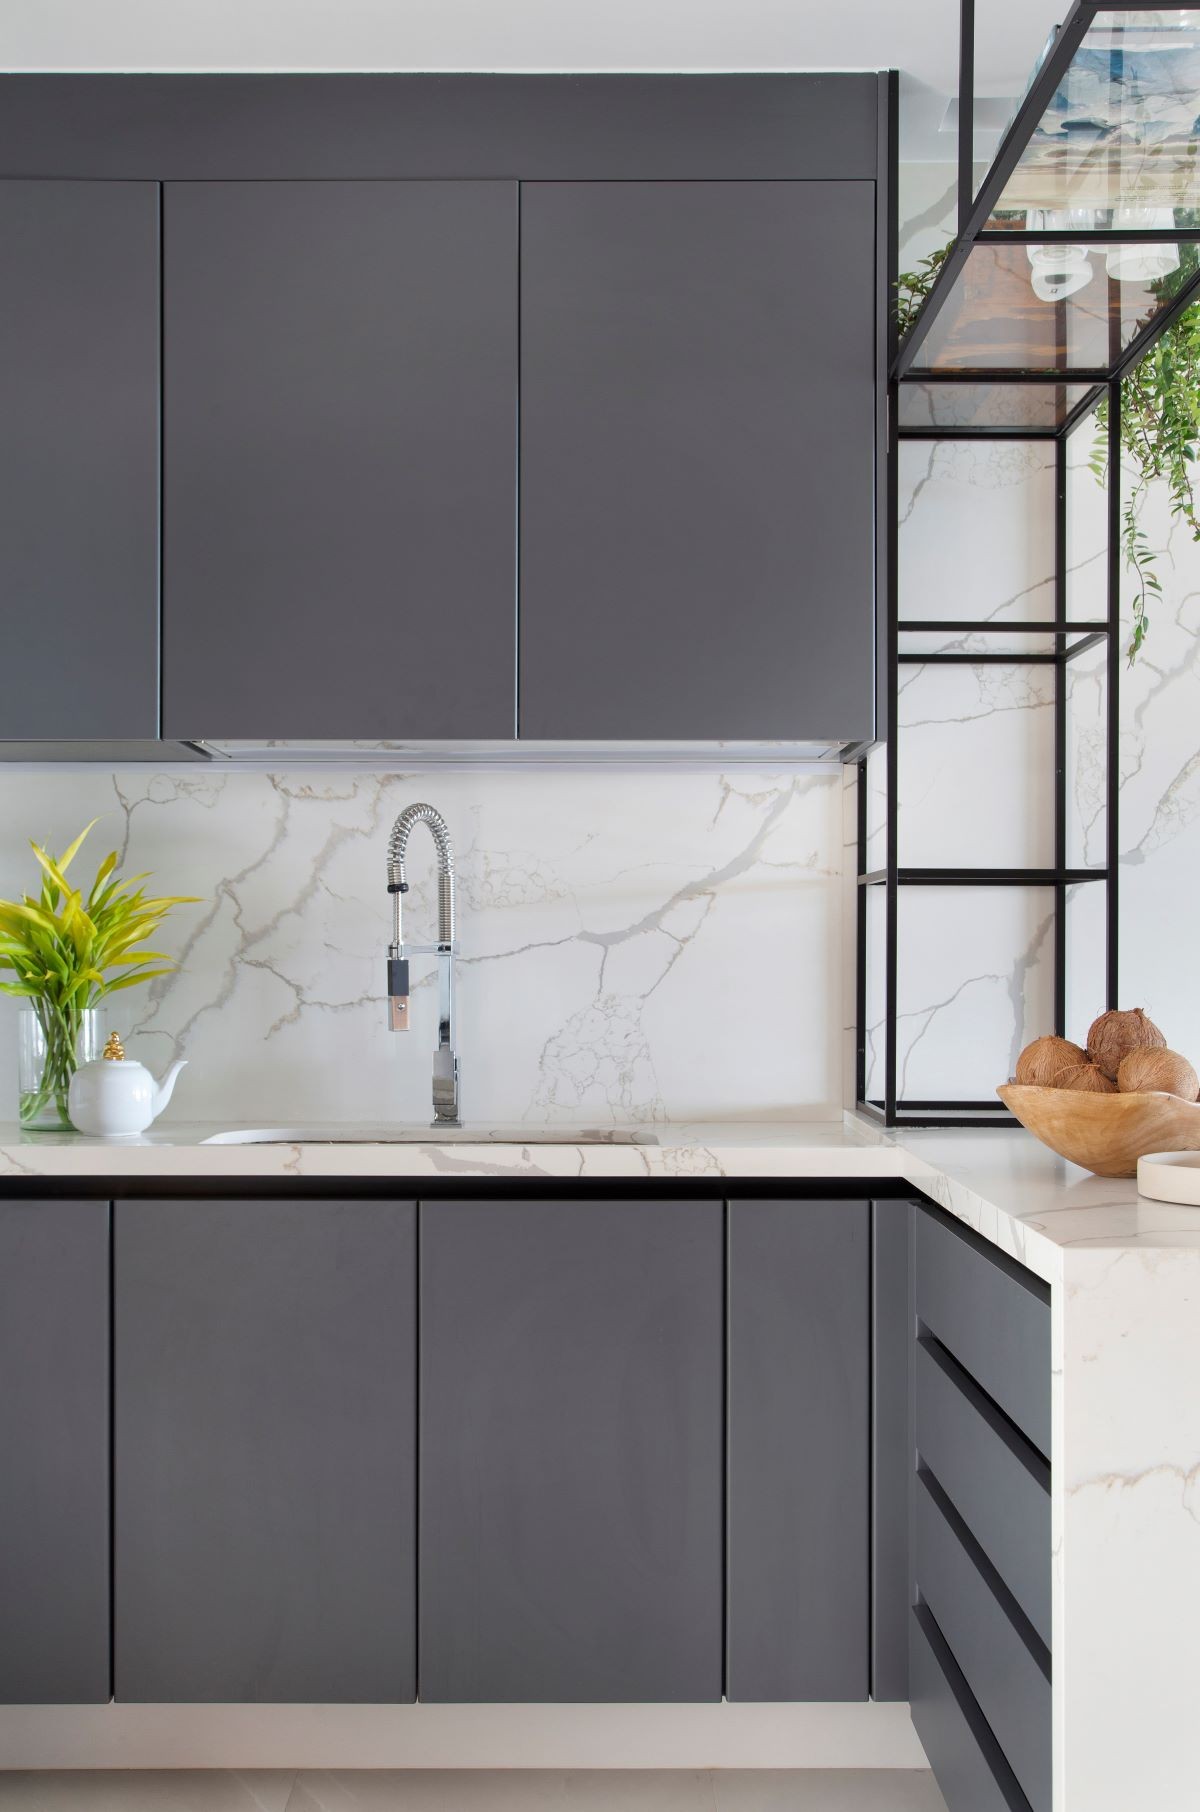 KITCHEN |  The dekton countertop gives the appearance of white marble with gray veining, leaving the whole palette in unity (Photo: Denilson Machado / MCA Estúdio / Publicity)